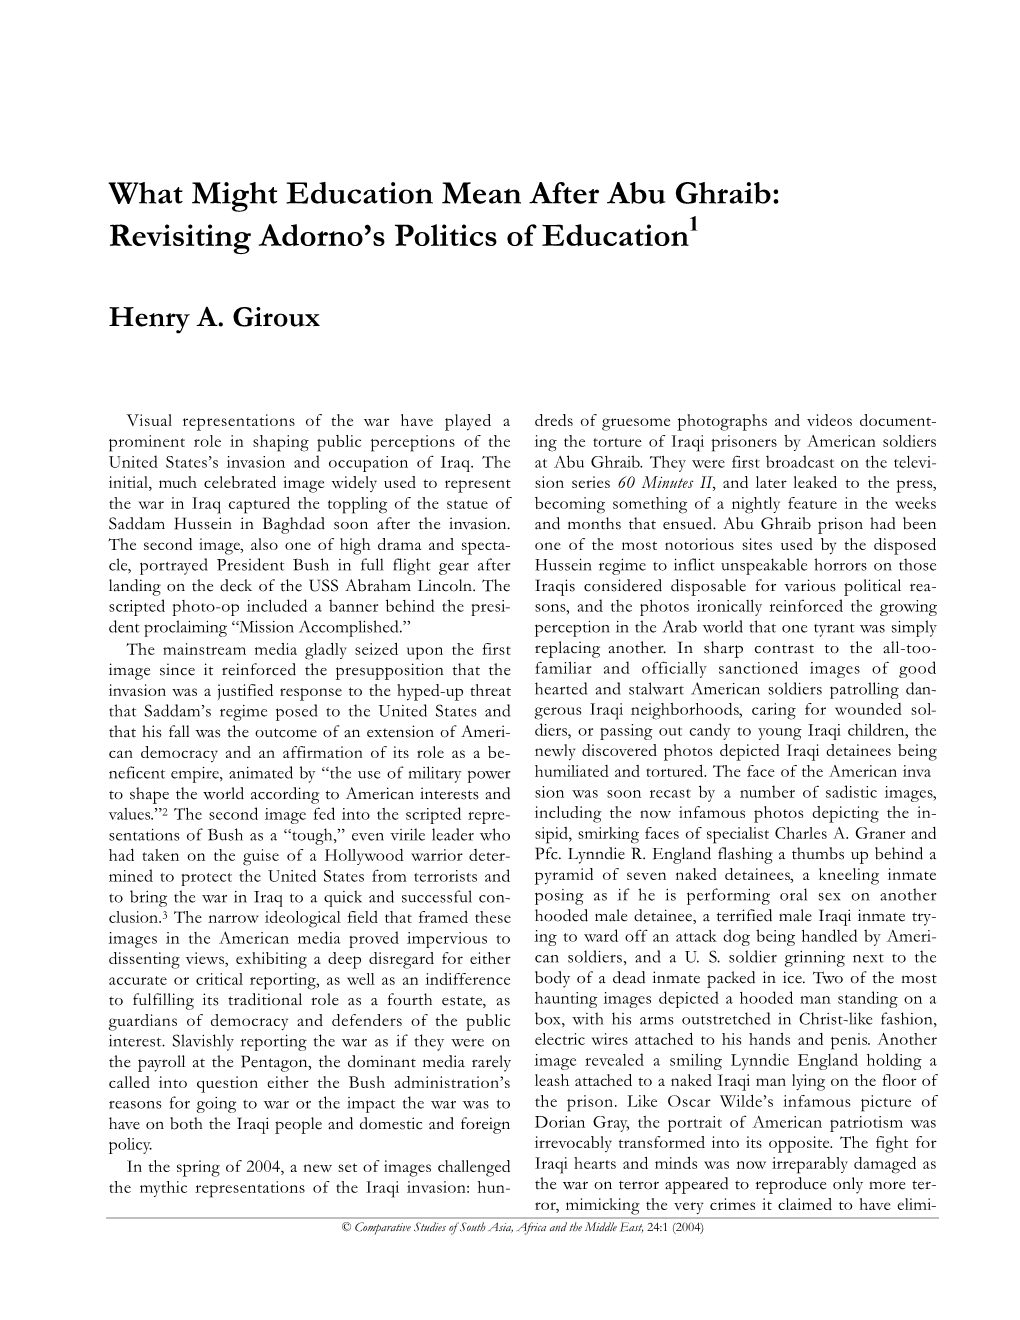 What Might Education Mean After Abu Ghraib: Revisiting Adorno’S Politics of Education1